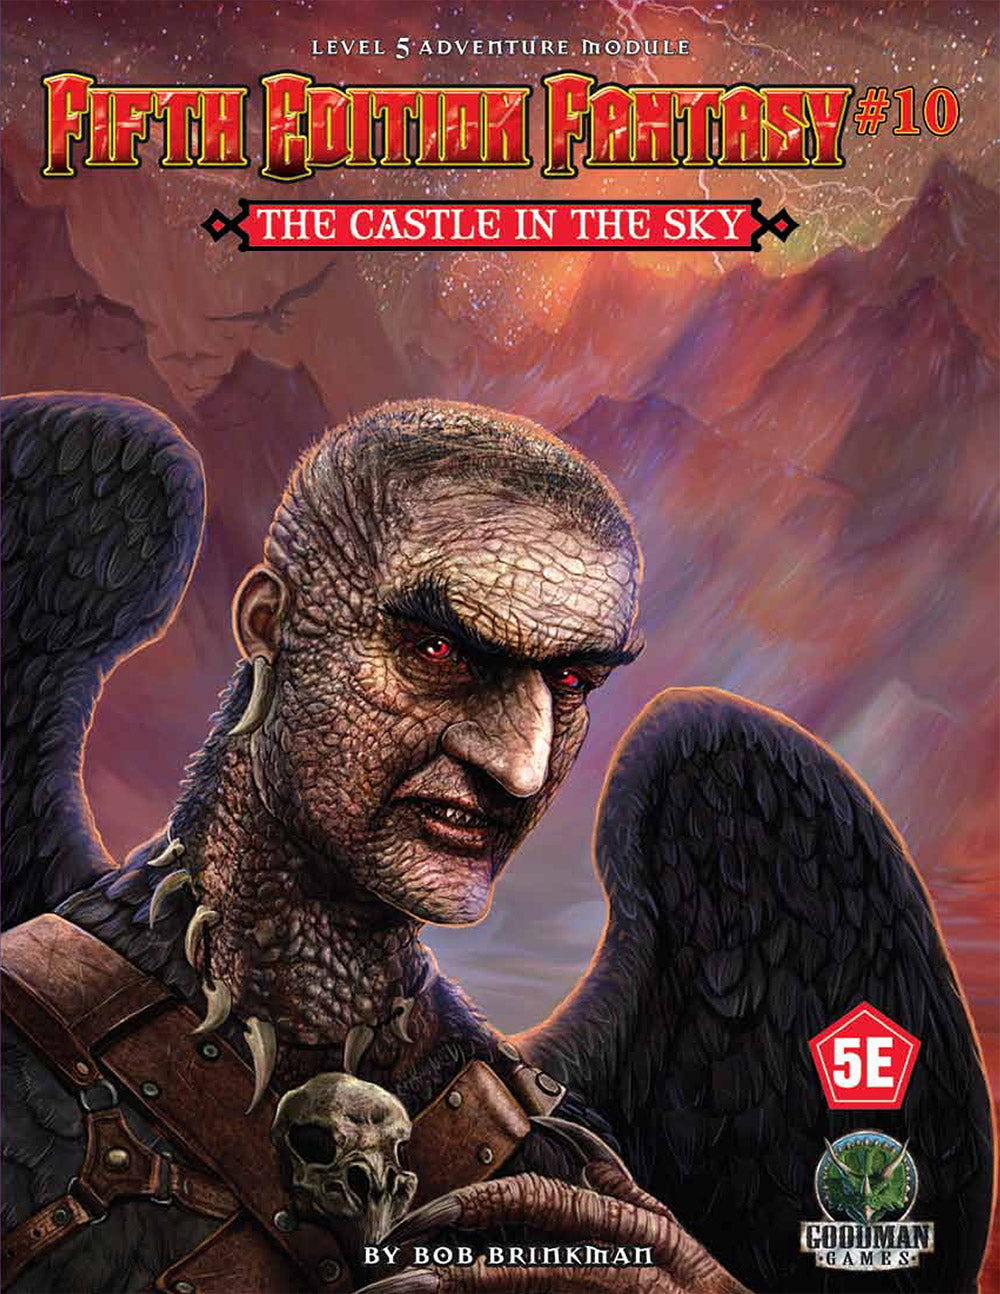 The Castle in the Sky -  Fifth Edition Fantasy Adventure #10